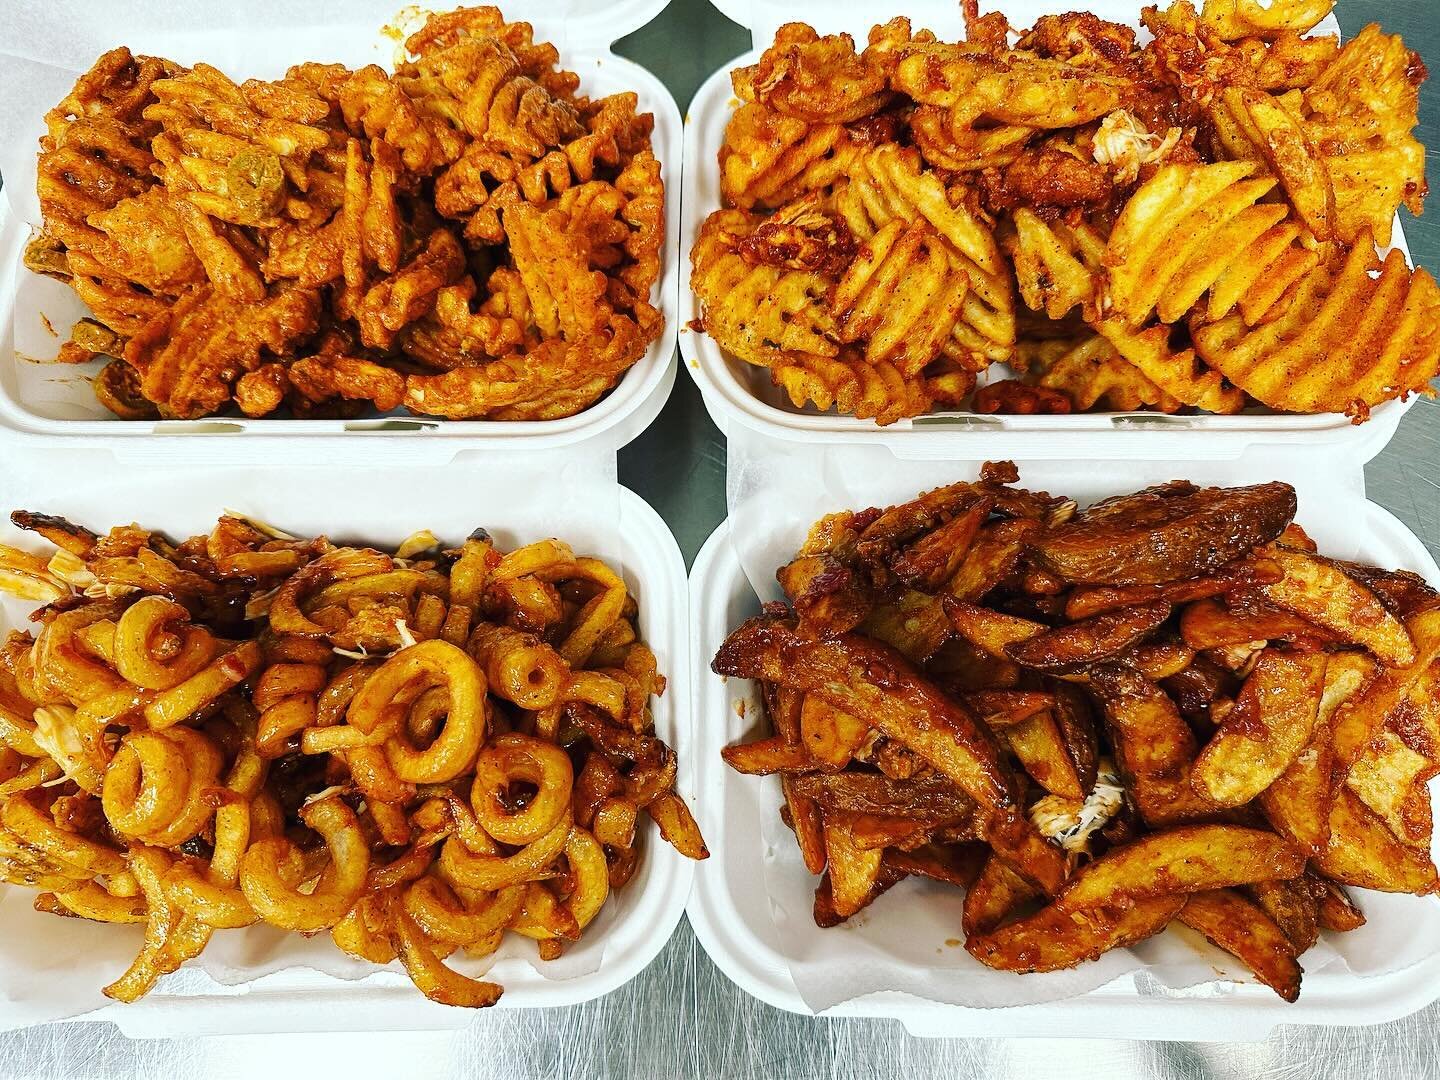 We are very happy to introduce some new items to our menu! 

Starting 11/13/2023, Loaded Fries will be available for purchase!

The 4 types of loaded fries we will offer are:

BBQ Loaded Wedges. Potato wedges mixed with chicken tenders, bacon, and to